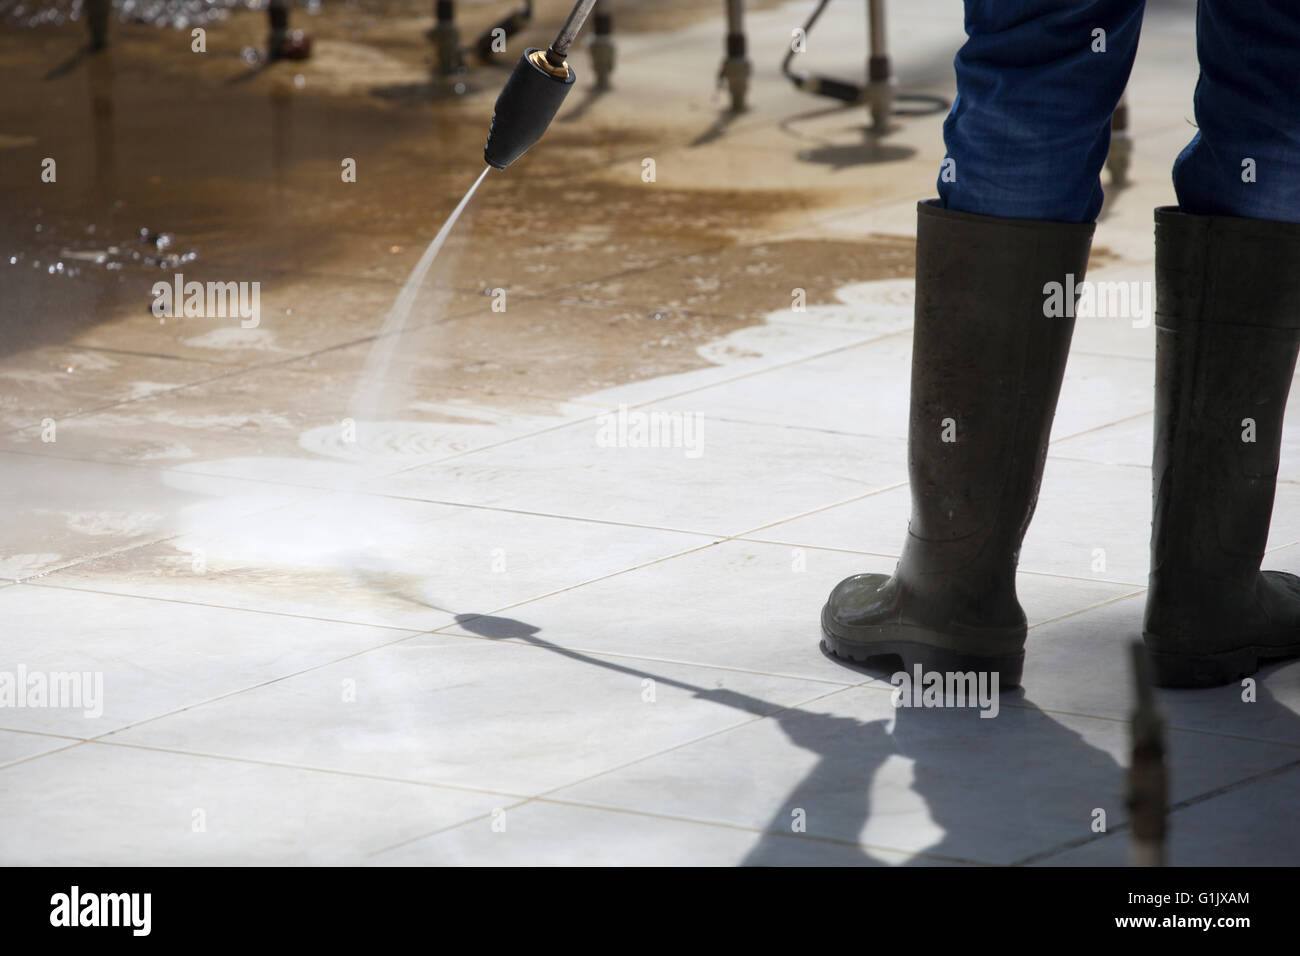 Worker in rubber boots, cleaning an outdoor fountain by pressure washer in a sunny day. Stock Photo